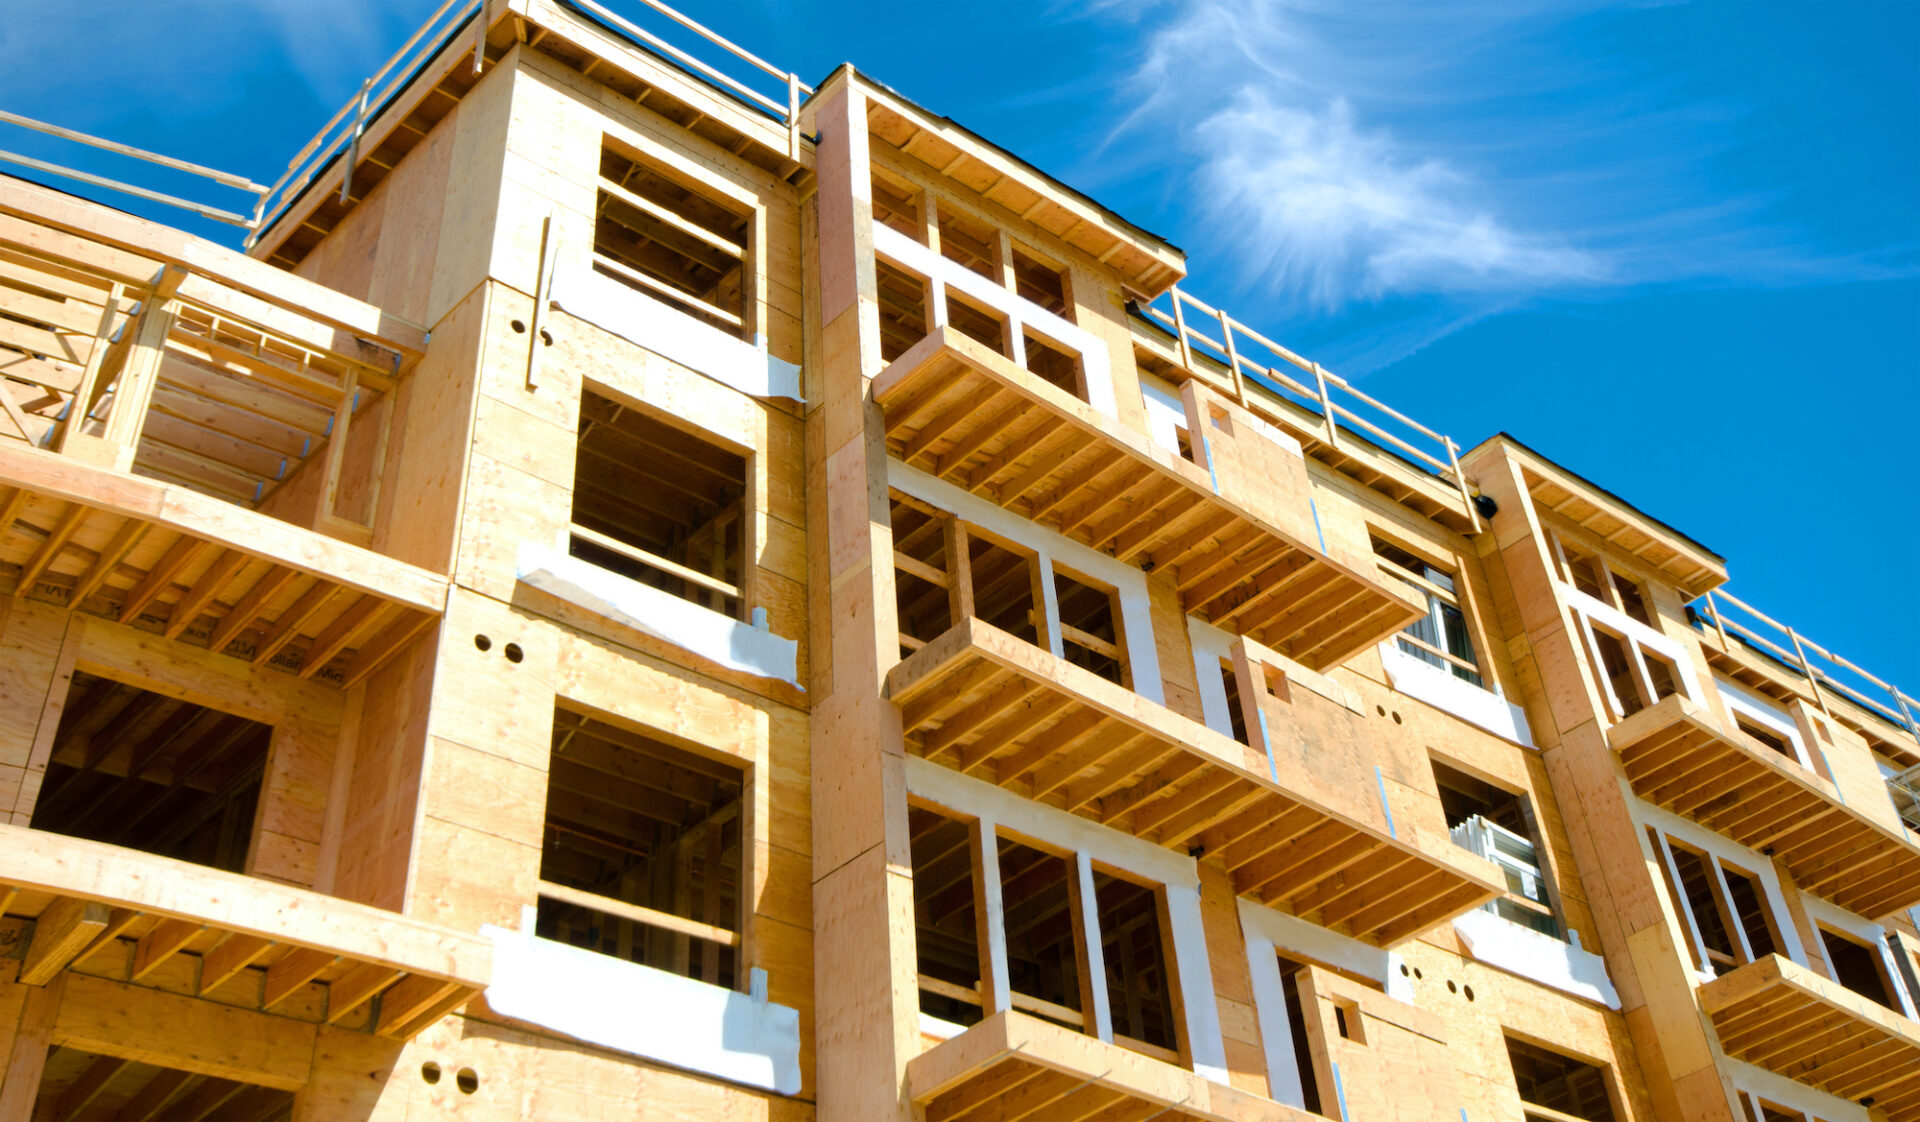 Builder Confidence In Multifamily Market Drops